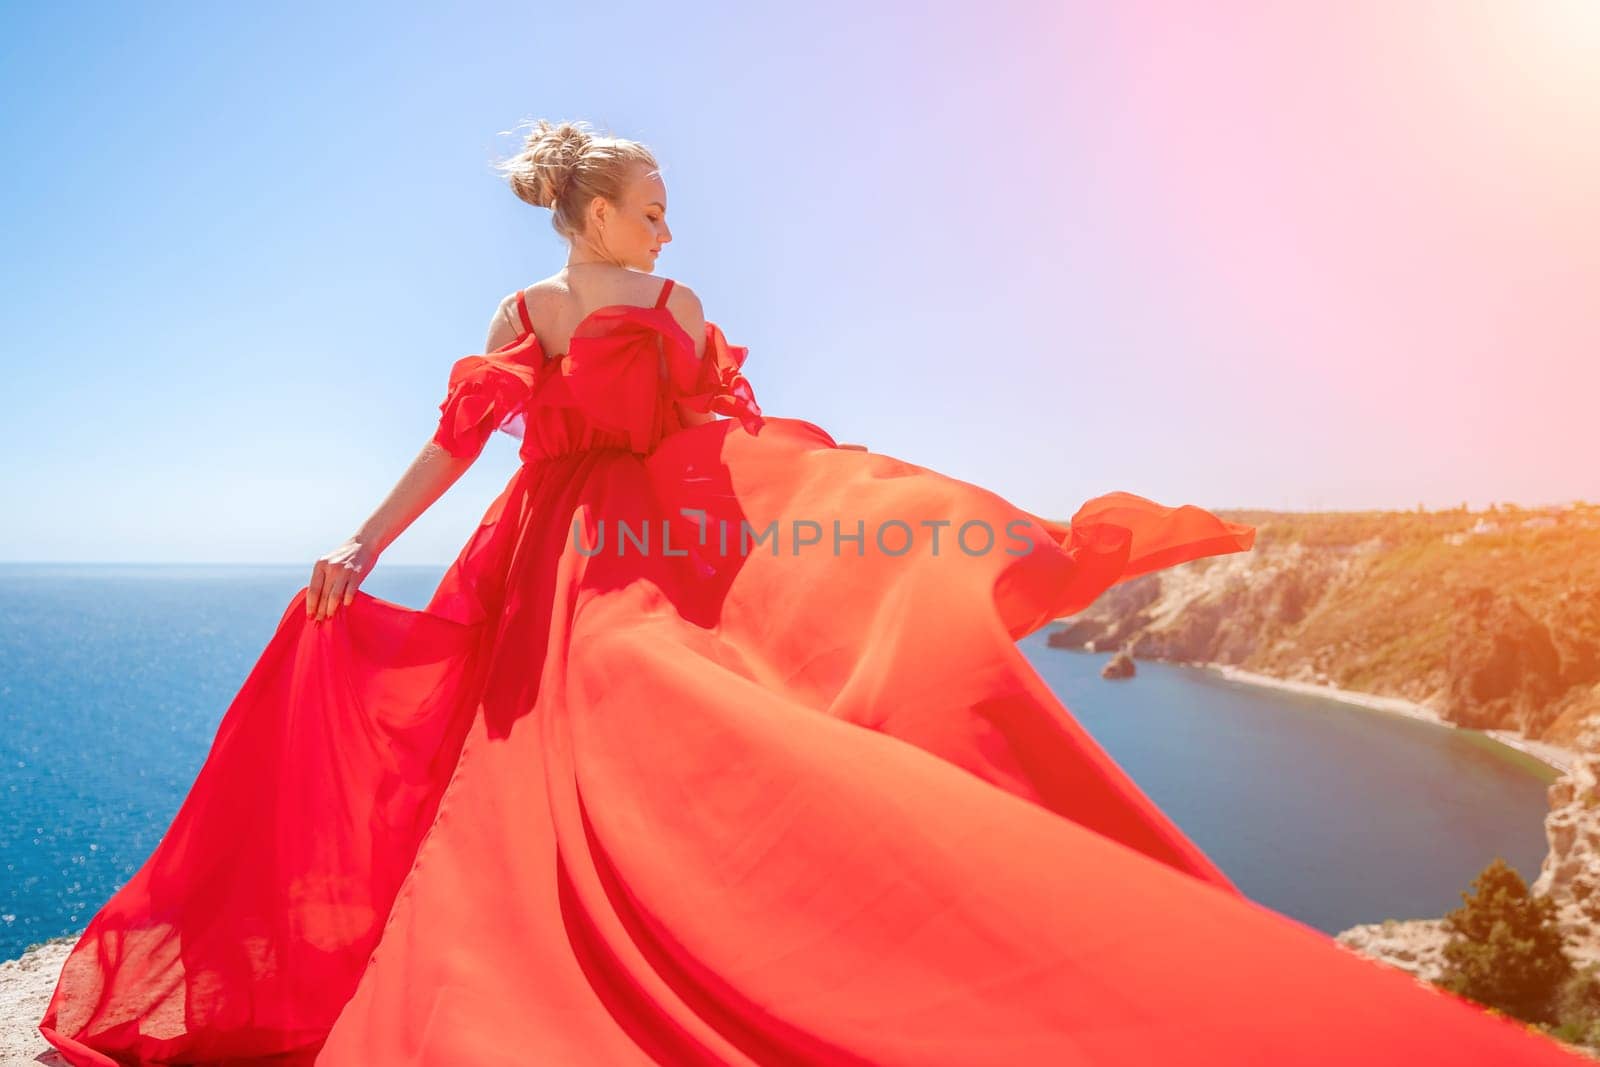 woman sea red dress. Blonde with long hair on a sunny seashore in a red flowing dress, back view, silk fabric waving in the wind. Against the backdrop of the blue sky and mountains on the seashore